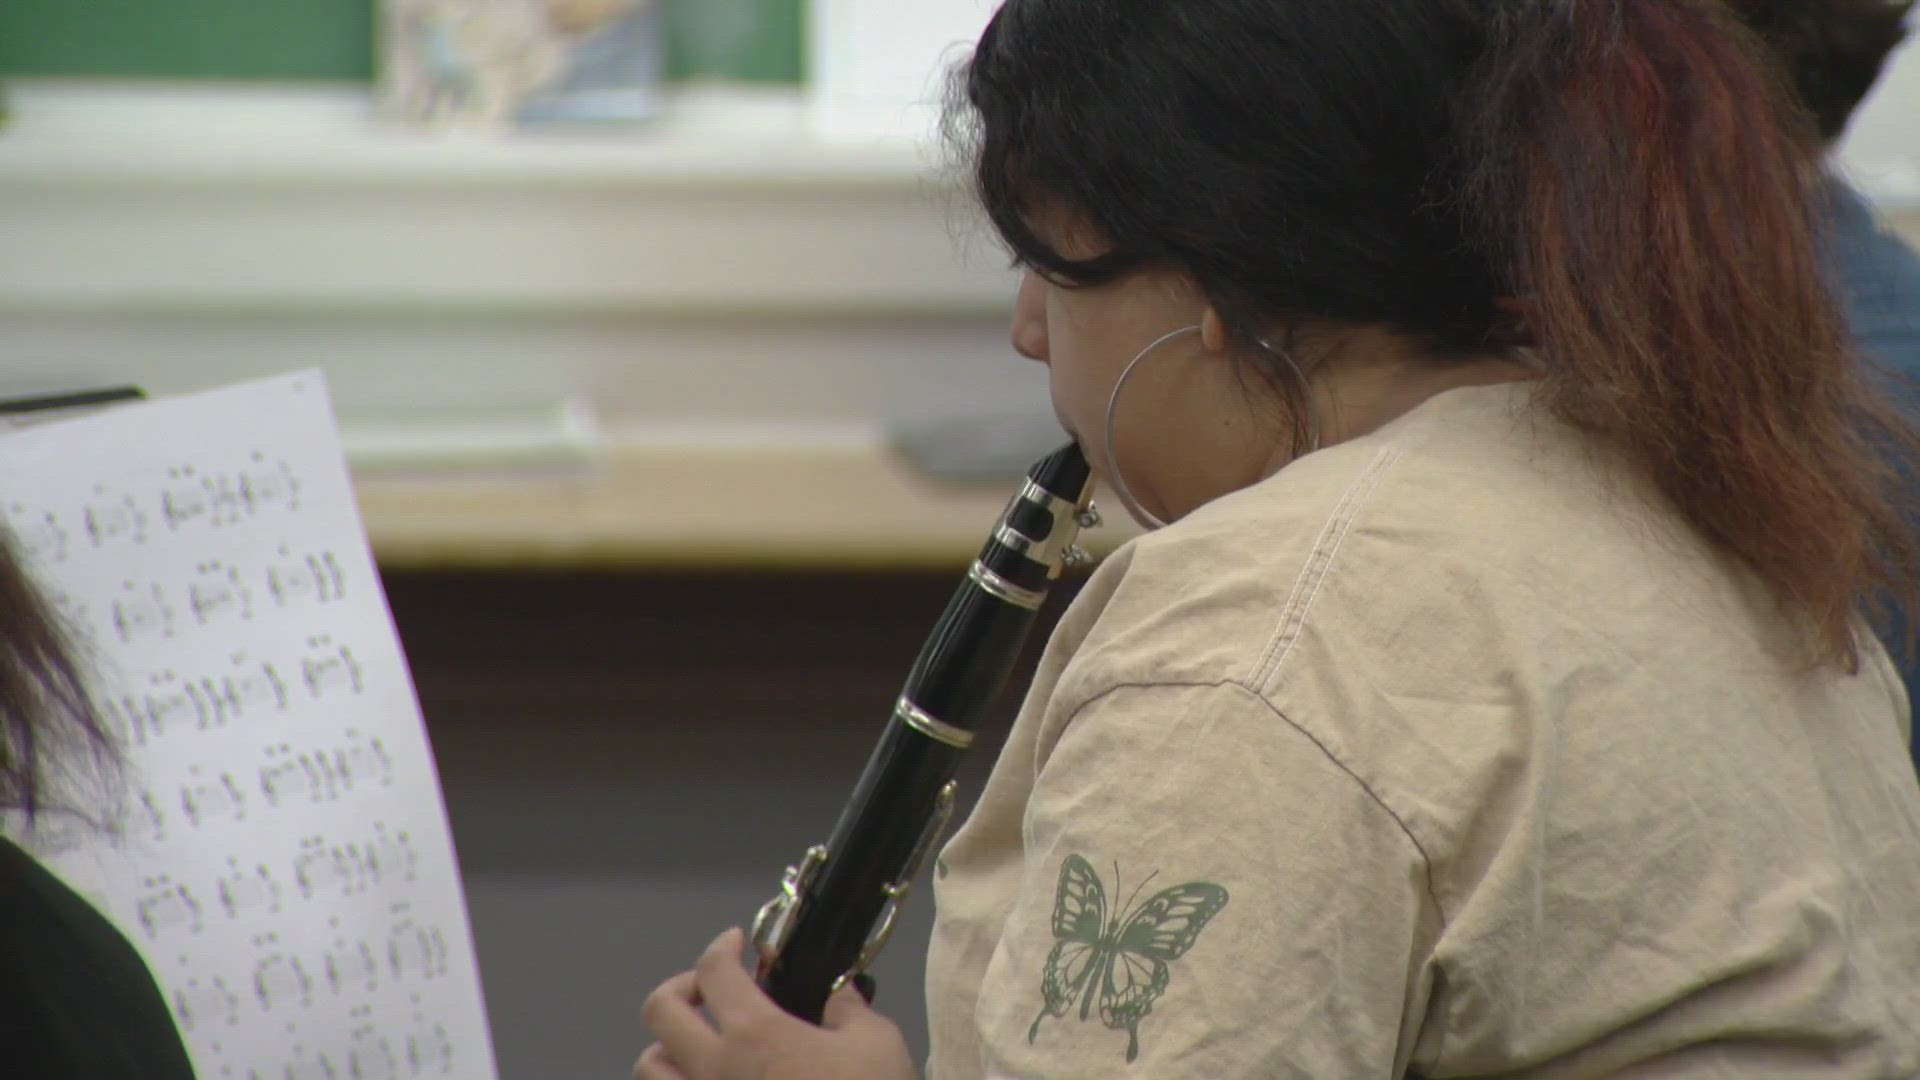 The nonprofit drive asks the public for money to pay to repair instruments that are donated for students in struggling music programs across Colorado.